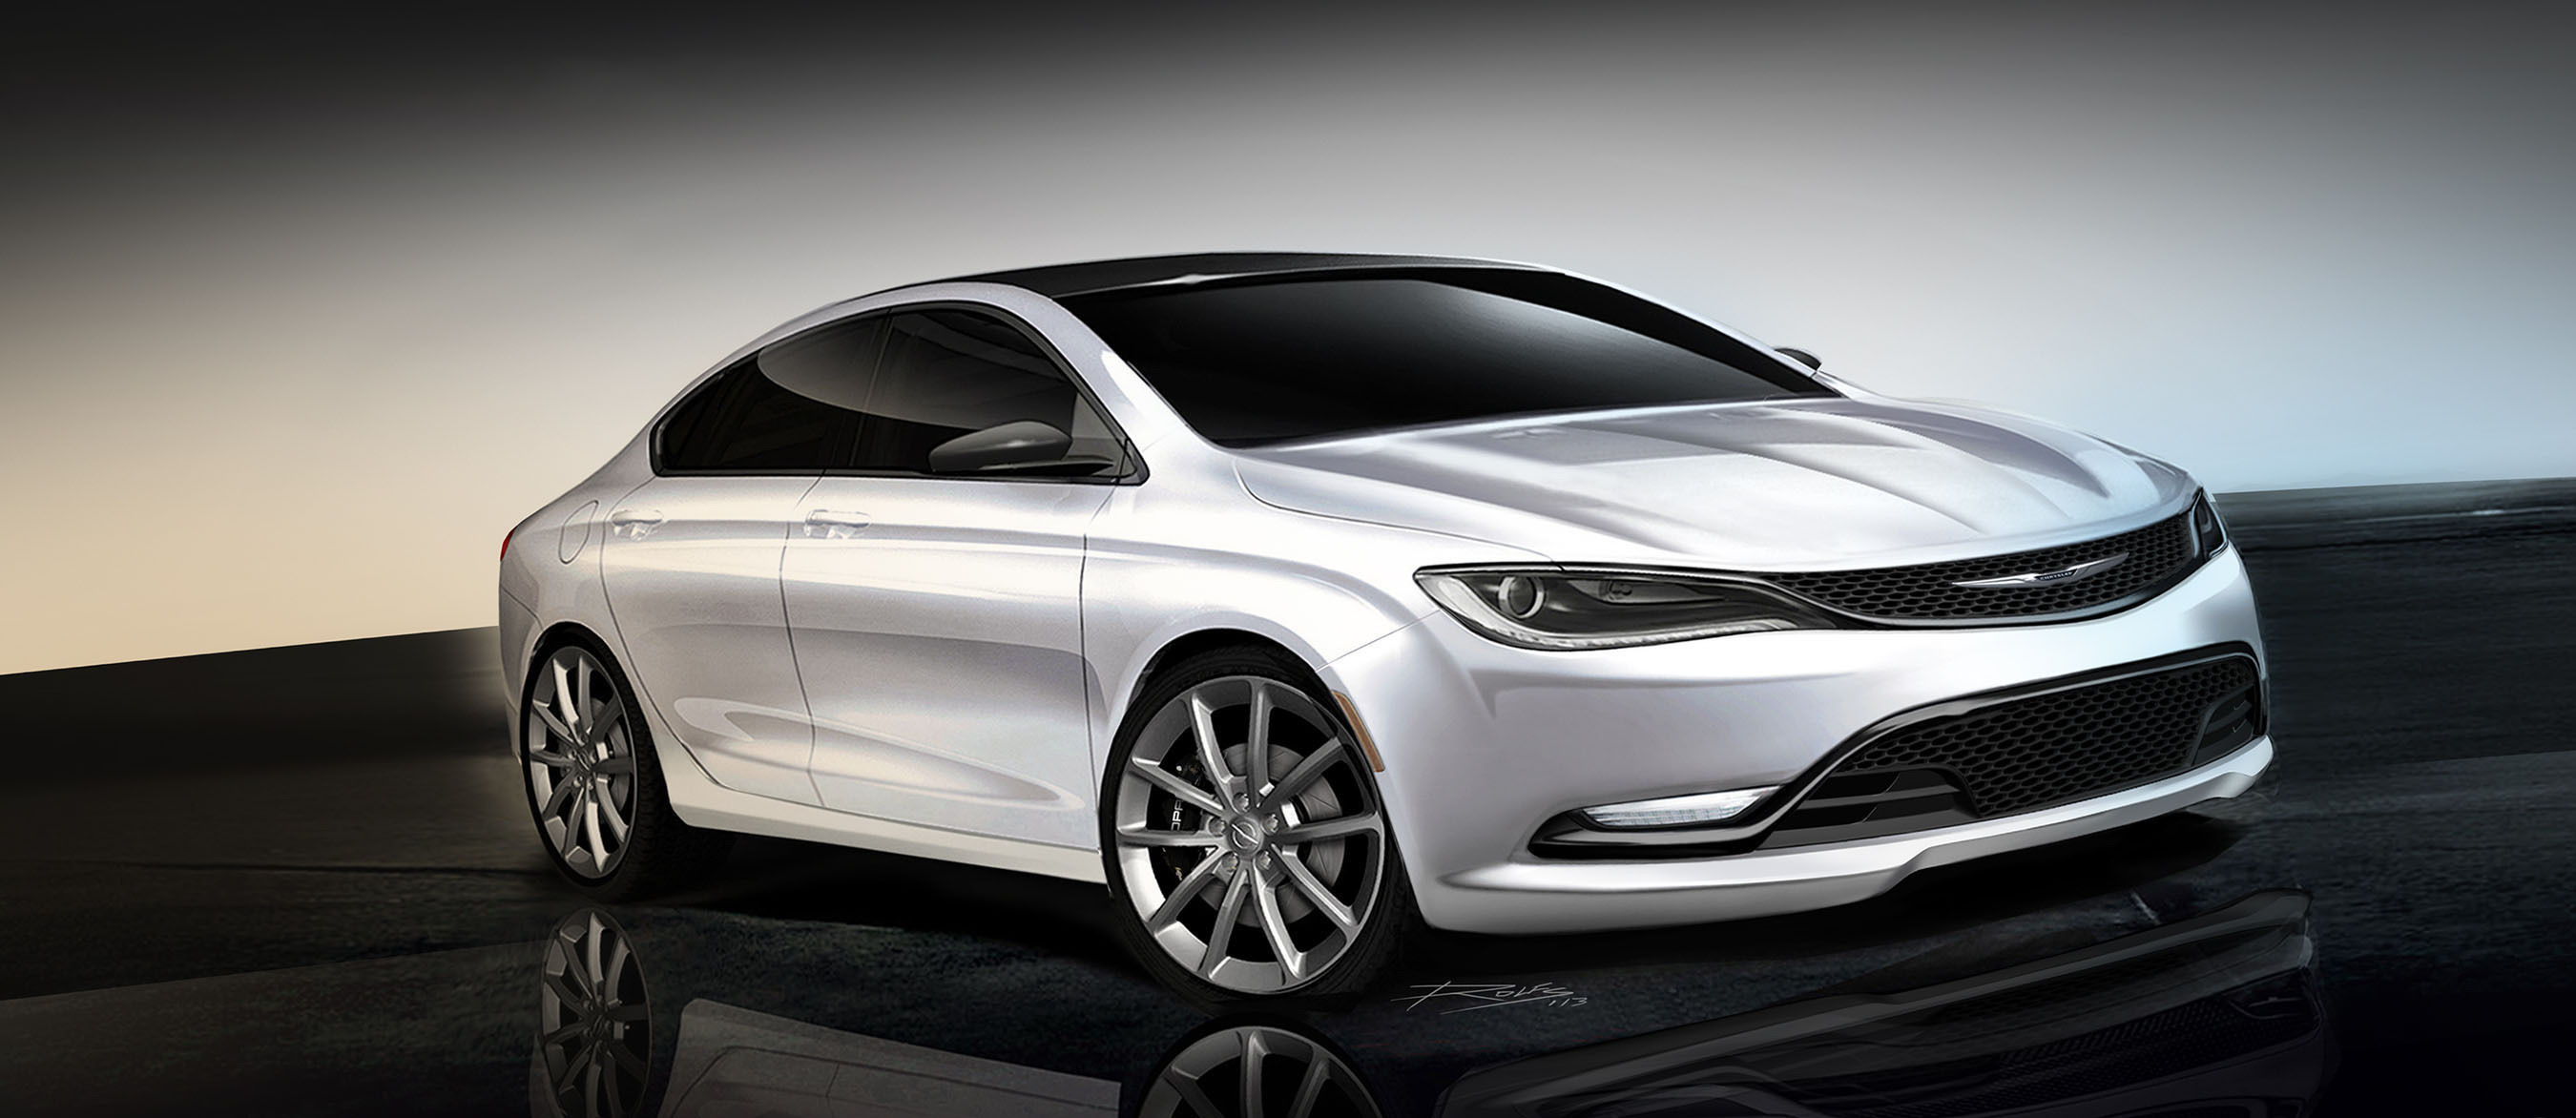 Primed for Personalization: Mopar Products Available at Launch to Customize  the All-new 2015 Chrysler 200